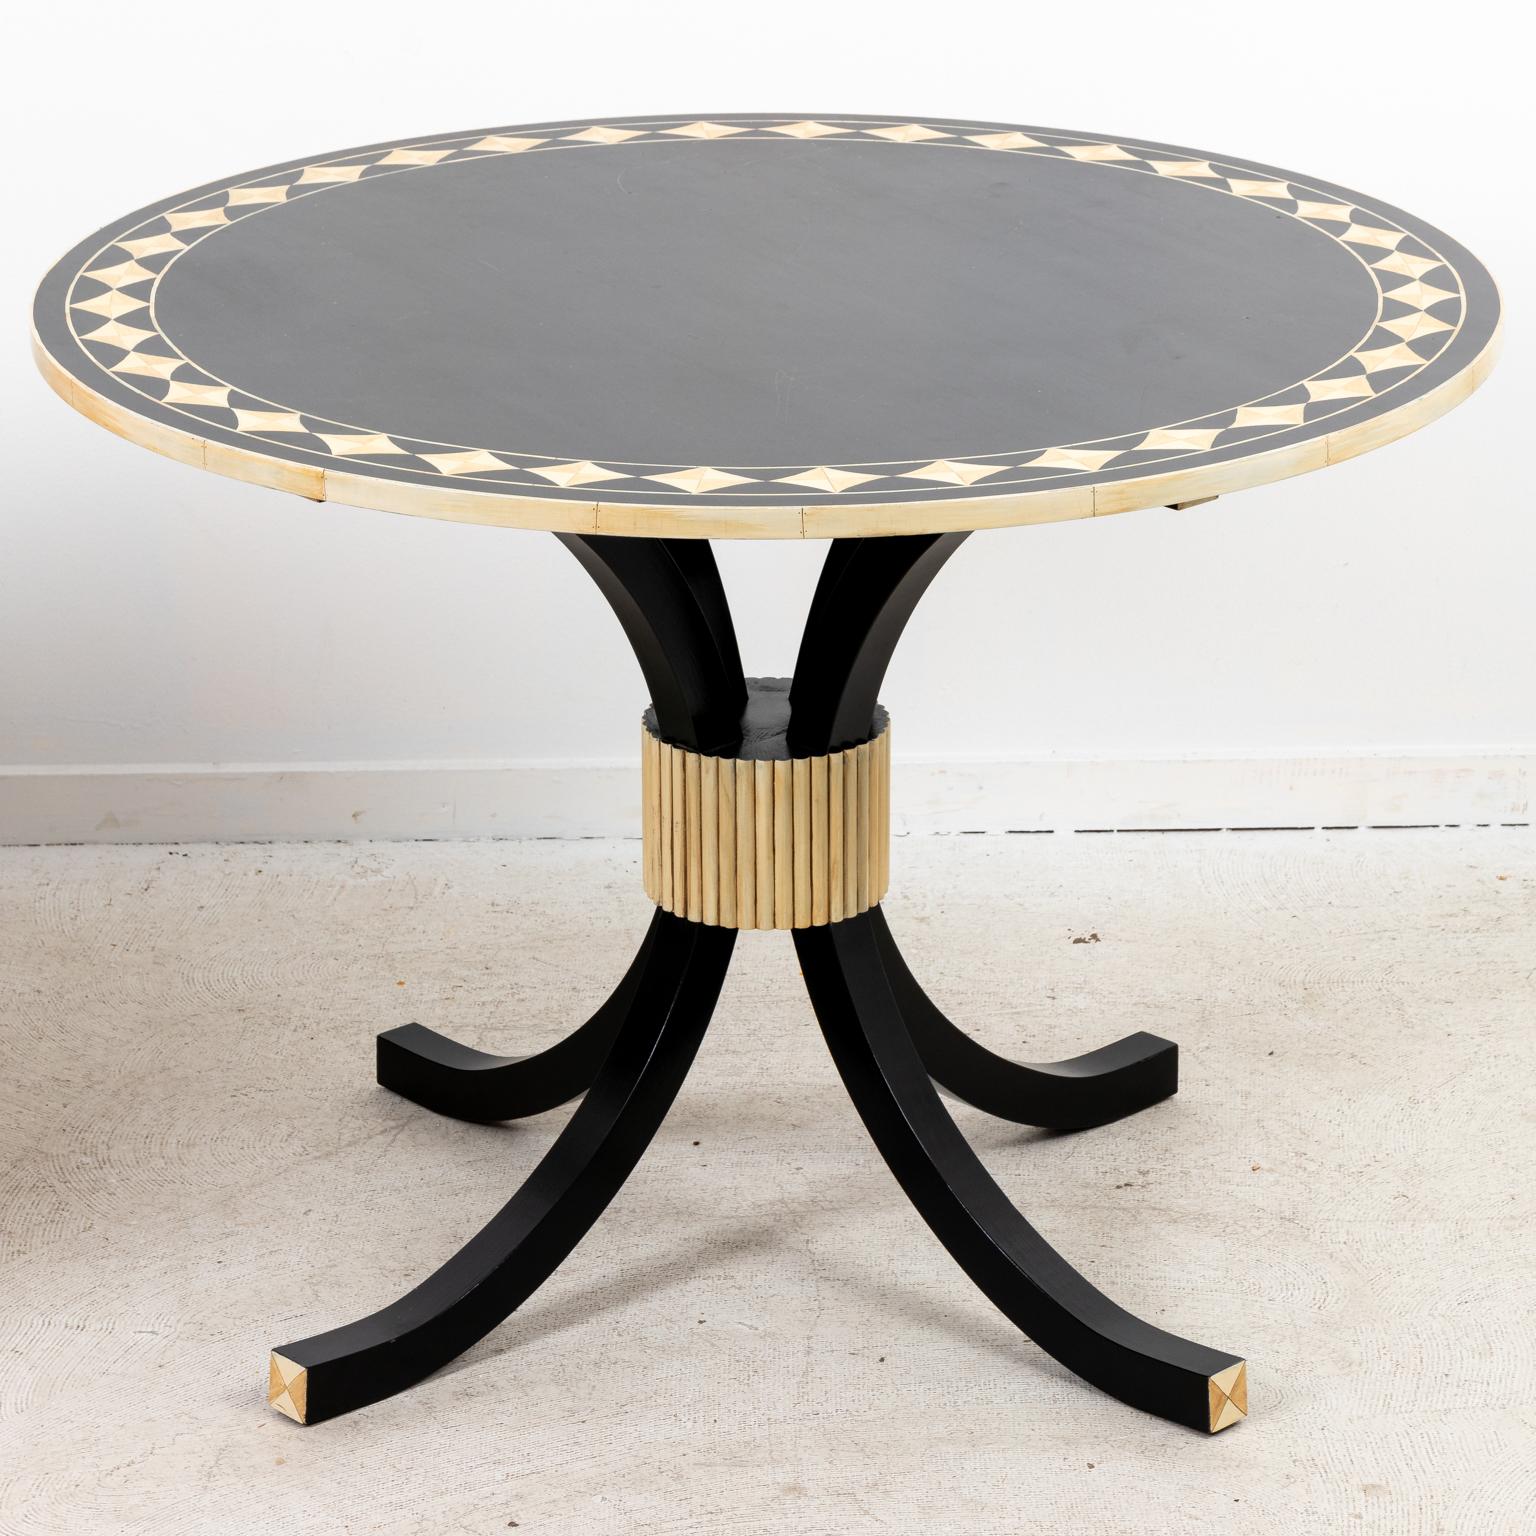 Circa 1990s Anglo Indian style painted black ebony round table with faux bone and ivory detail. The table also features lozenge shaped trim on the tabletop. Made in the United States. Please note of wear consistent with age.